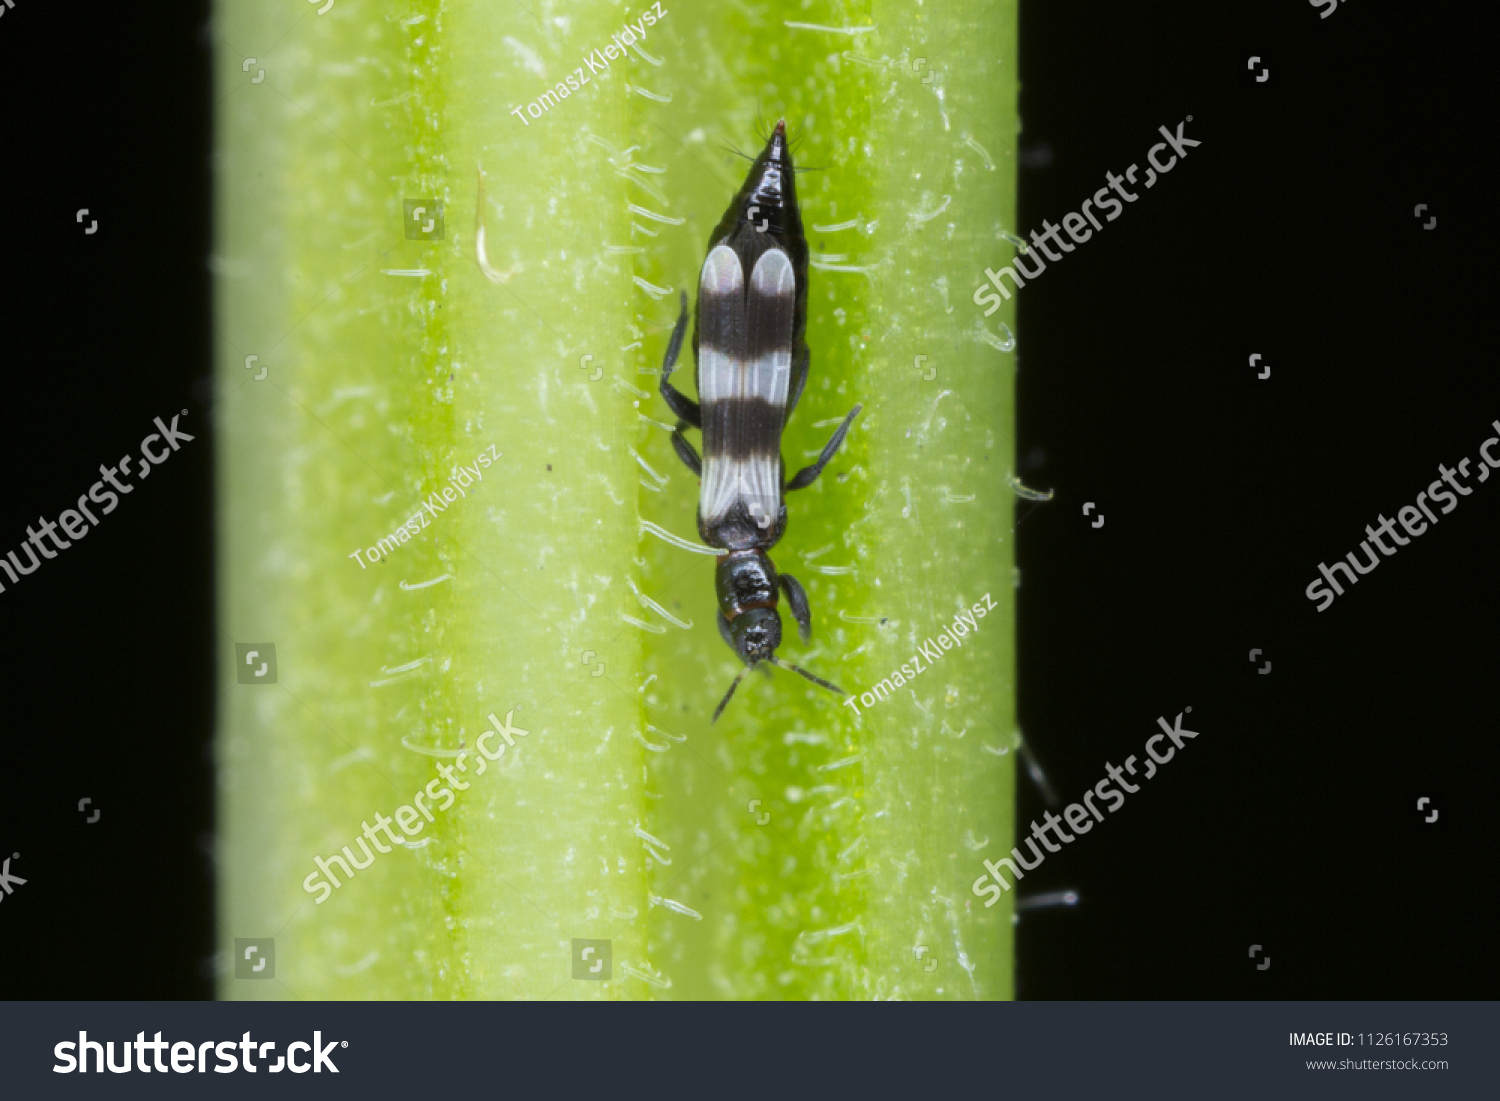 Thrips Thysanoptera (Aeolothrips: Aeolothripidae). Its predatory insect hunting for other, for example plant pests. #1126167353